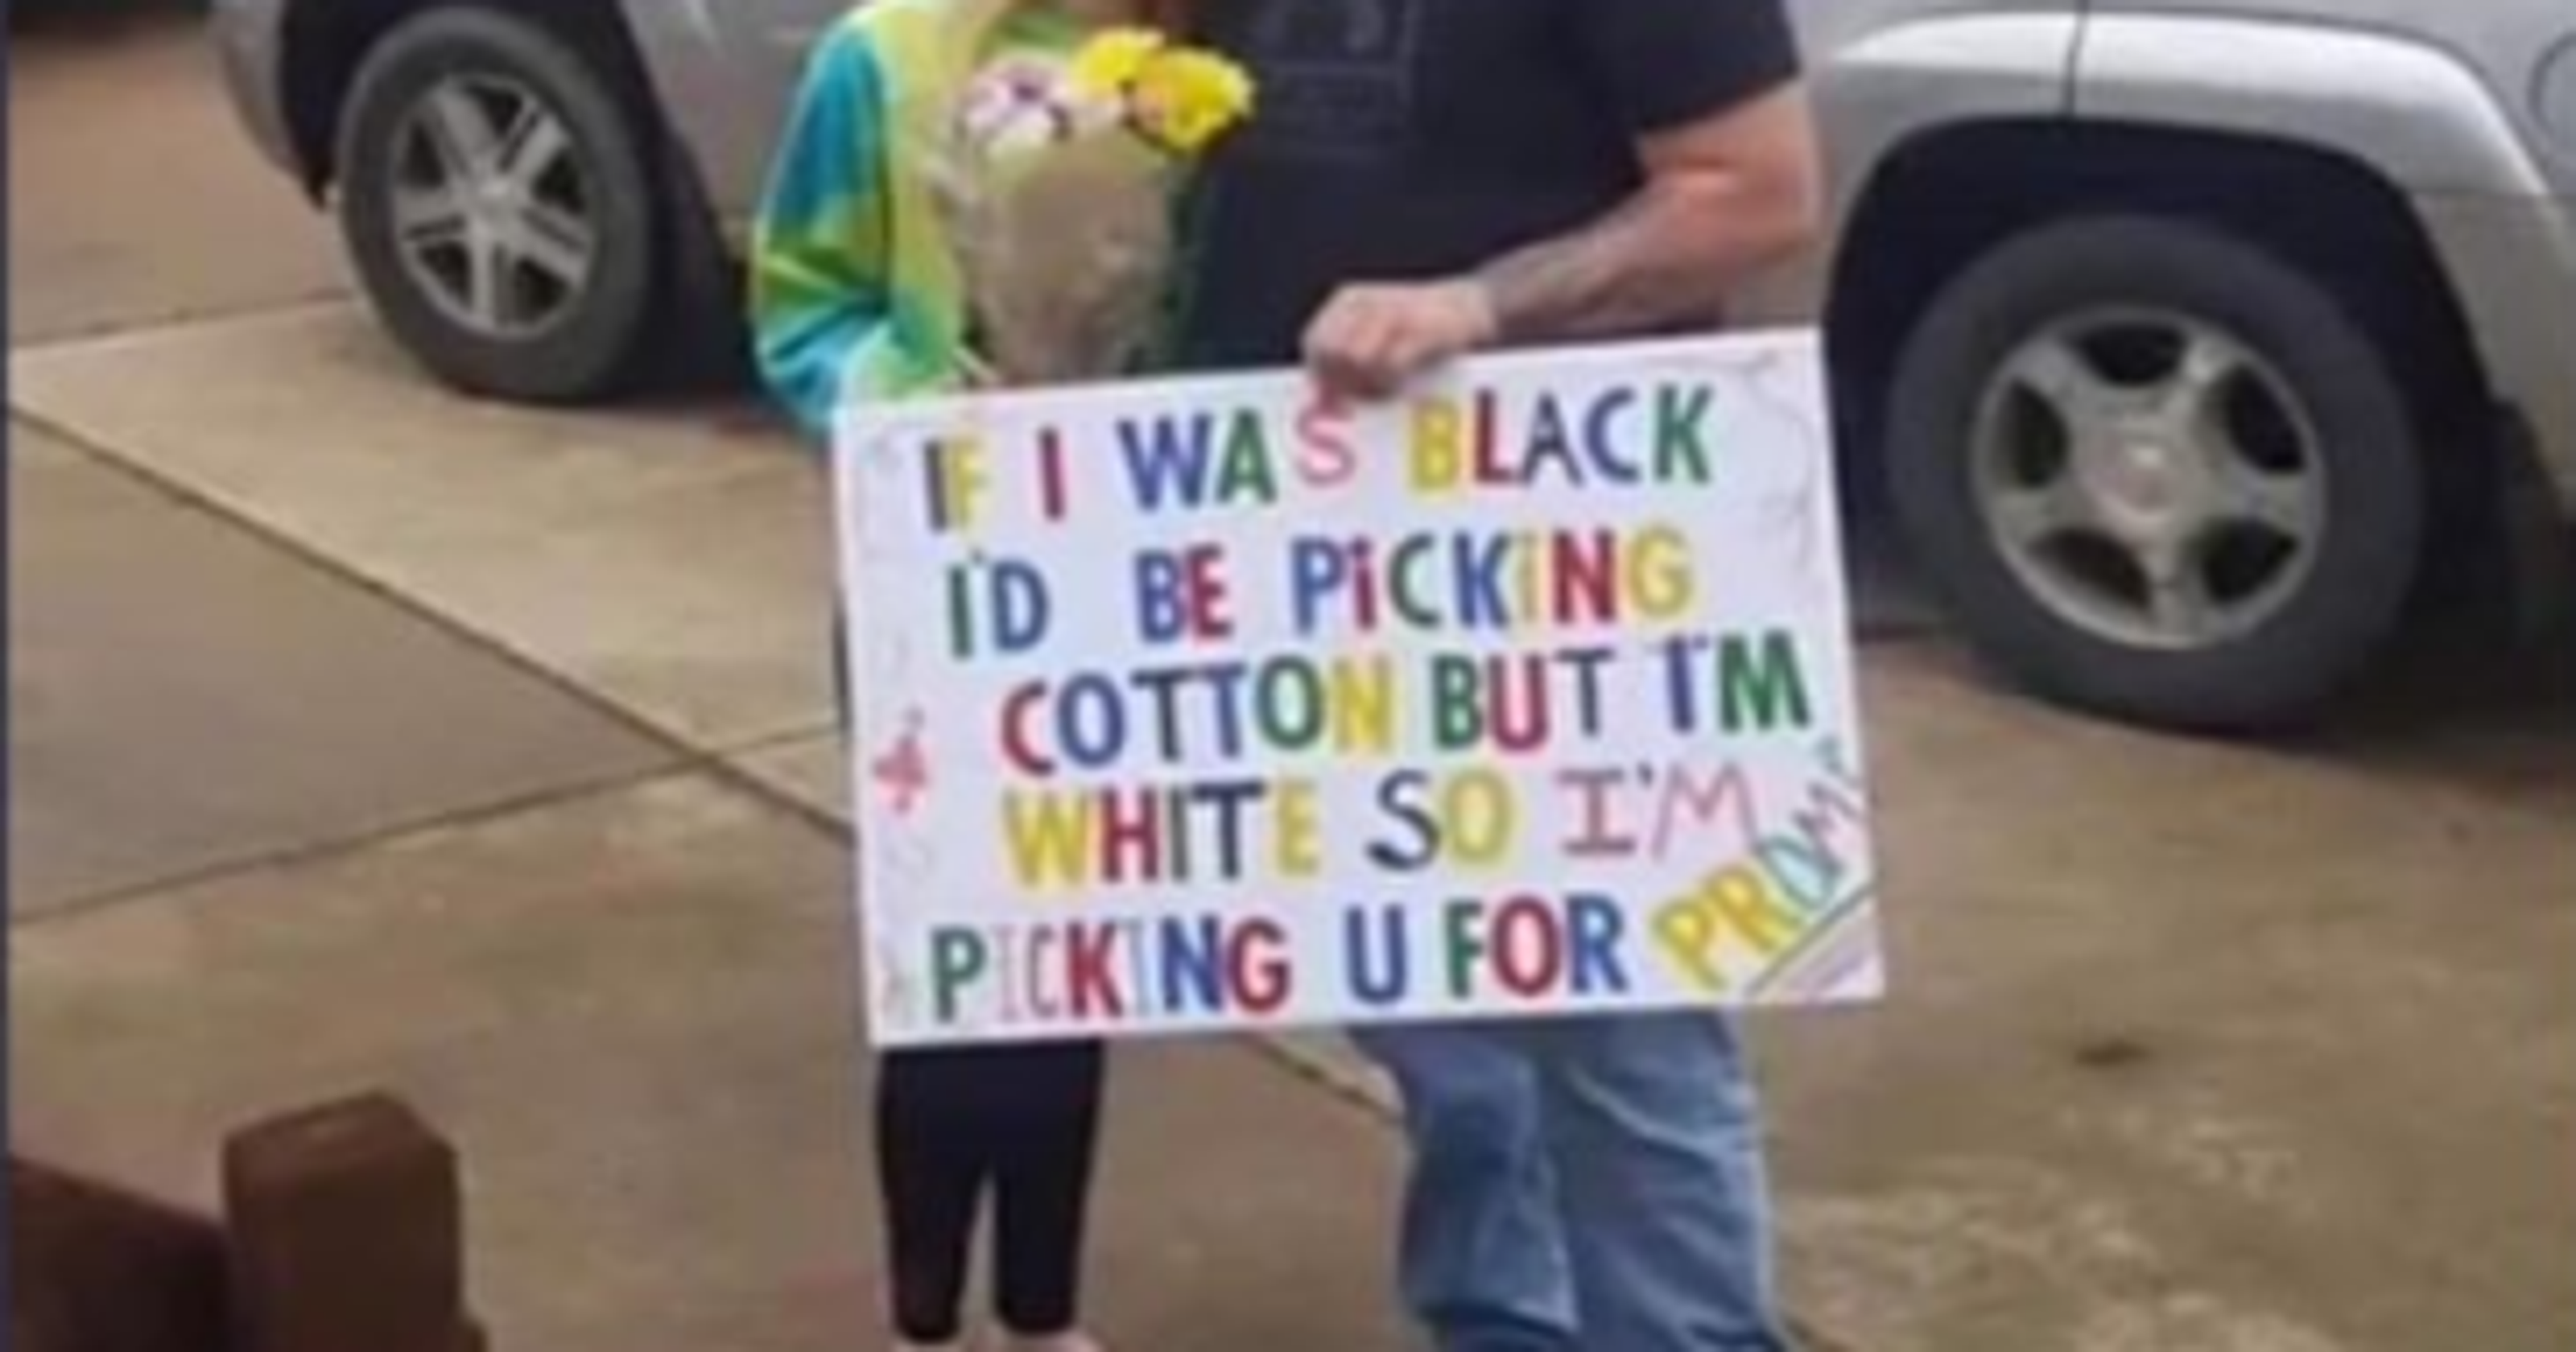 prom-proposal-with-racist-picking-cotton-sign-sparks-backlash